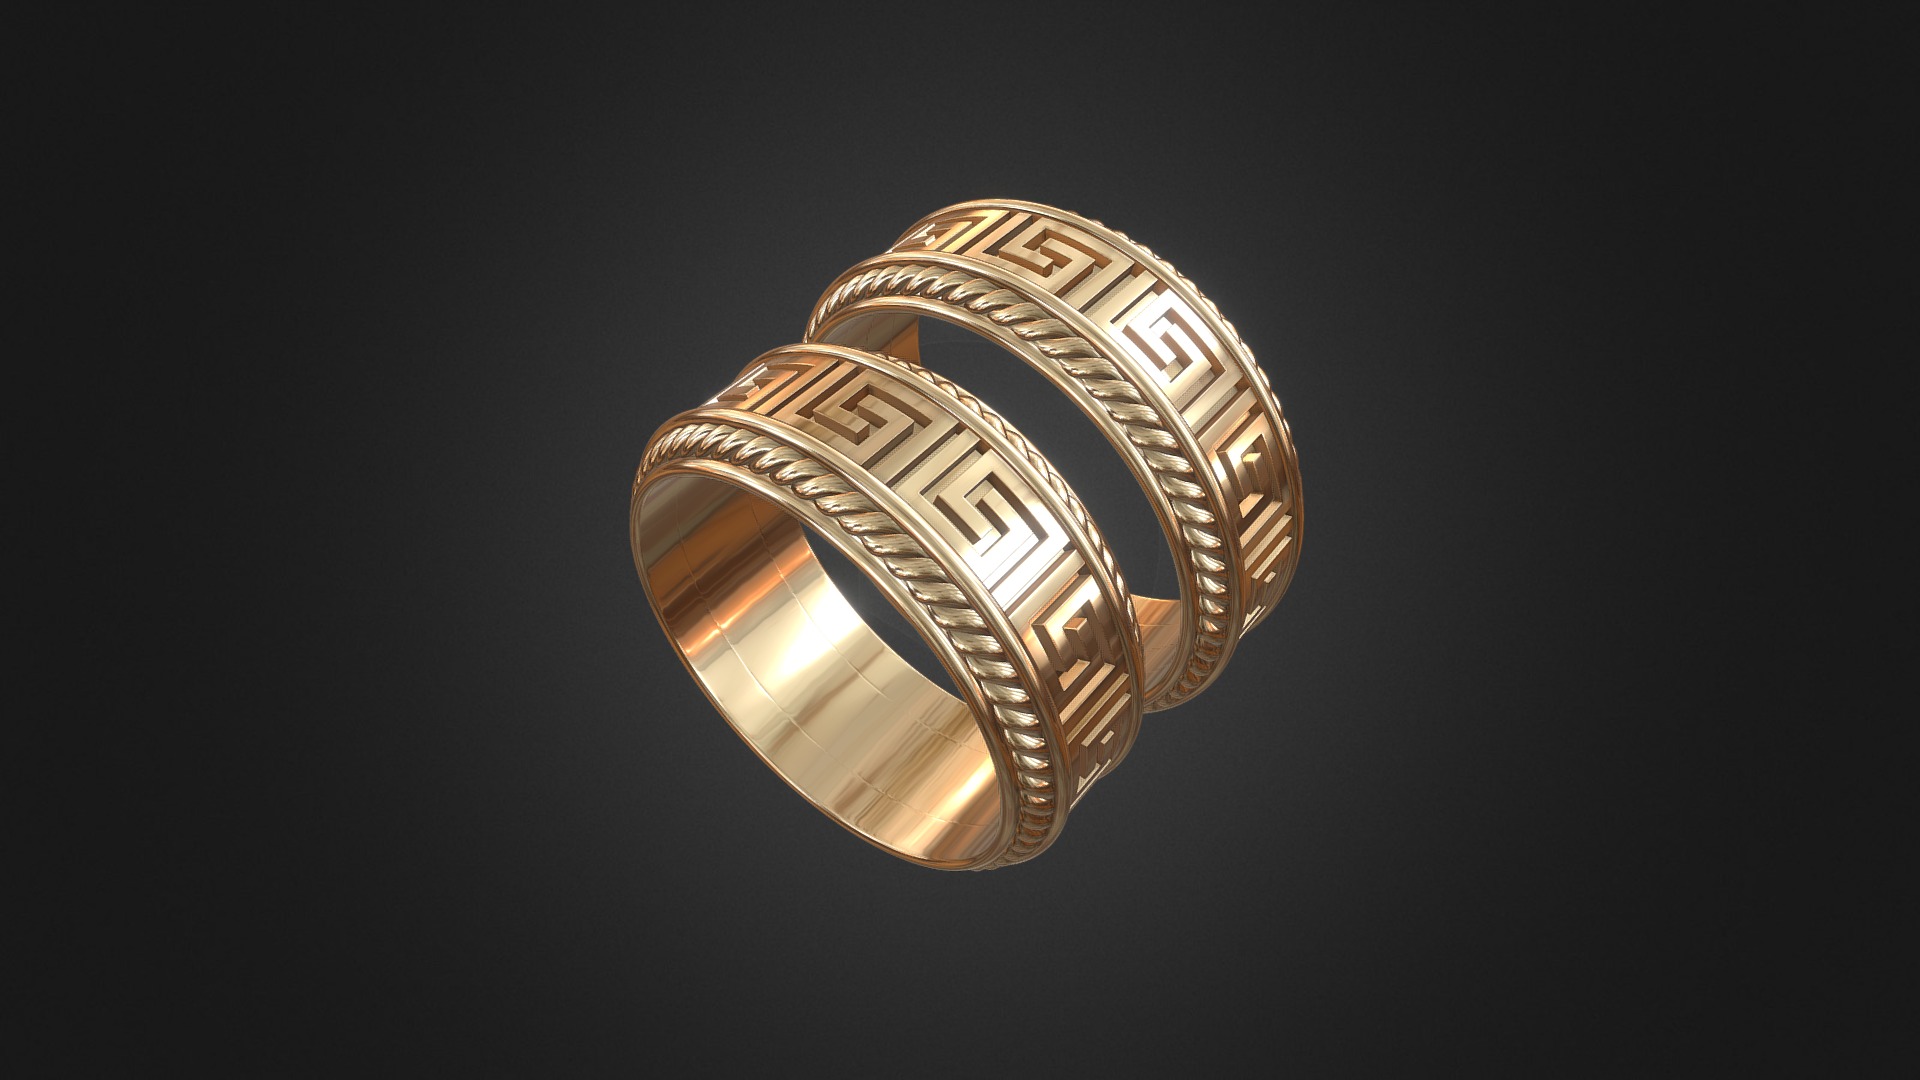 3D model 883 – Rings - This is a 3D model of the 883 - Rings. The 3D model is about a circular object with a design on it.